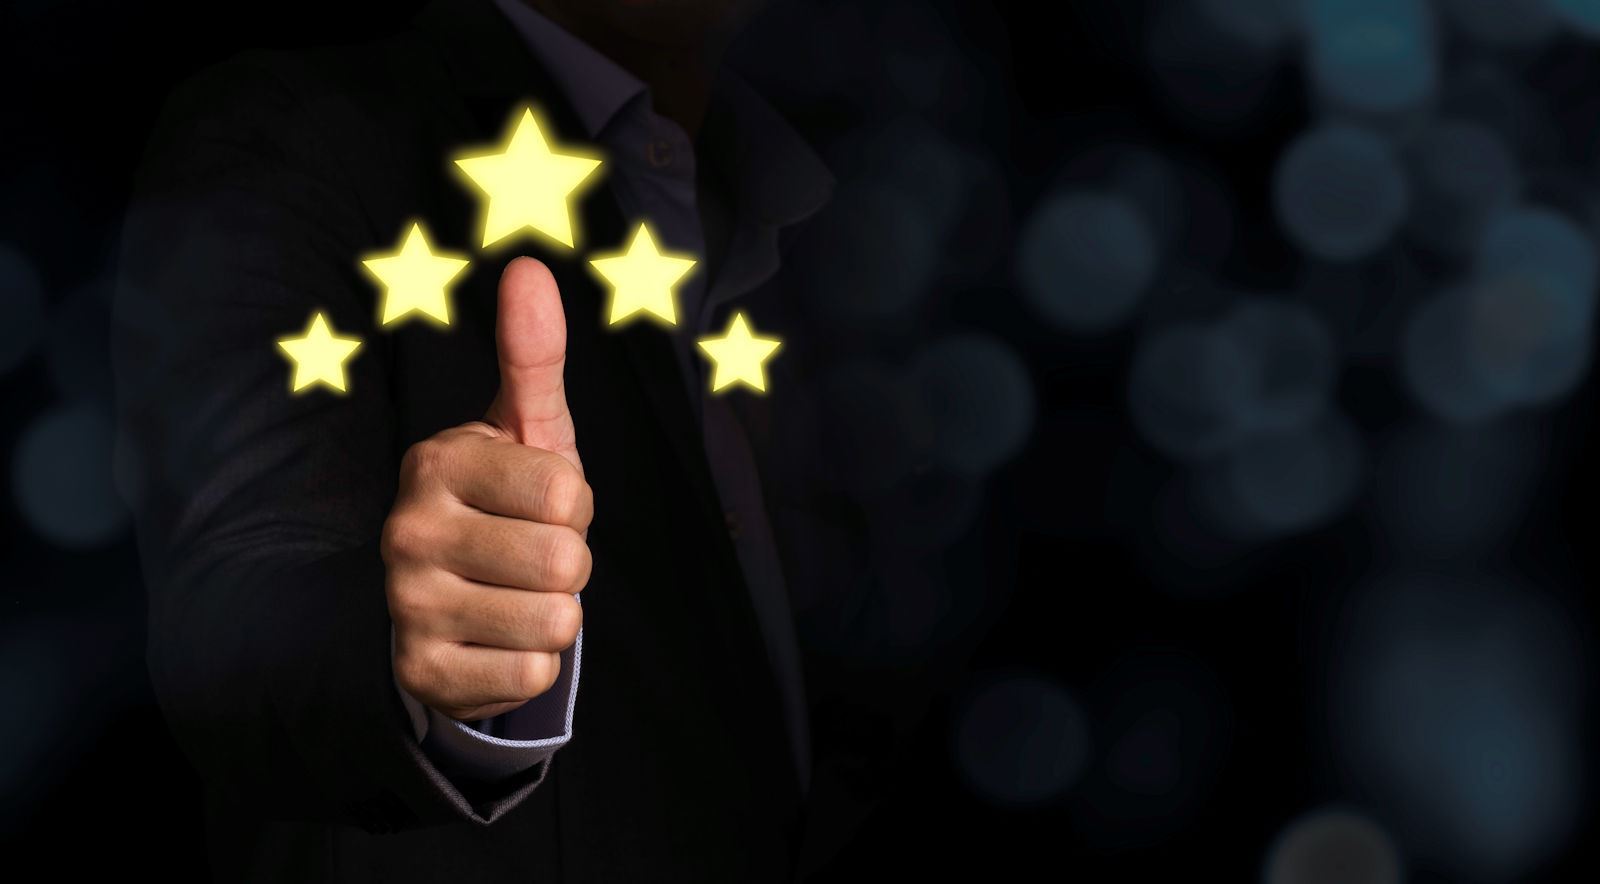 How To Get Good Online Reviews